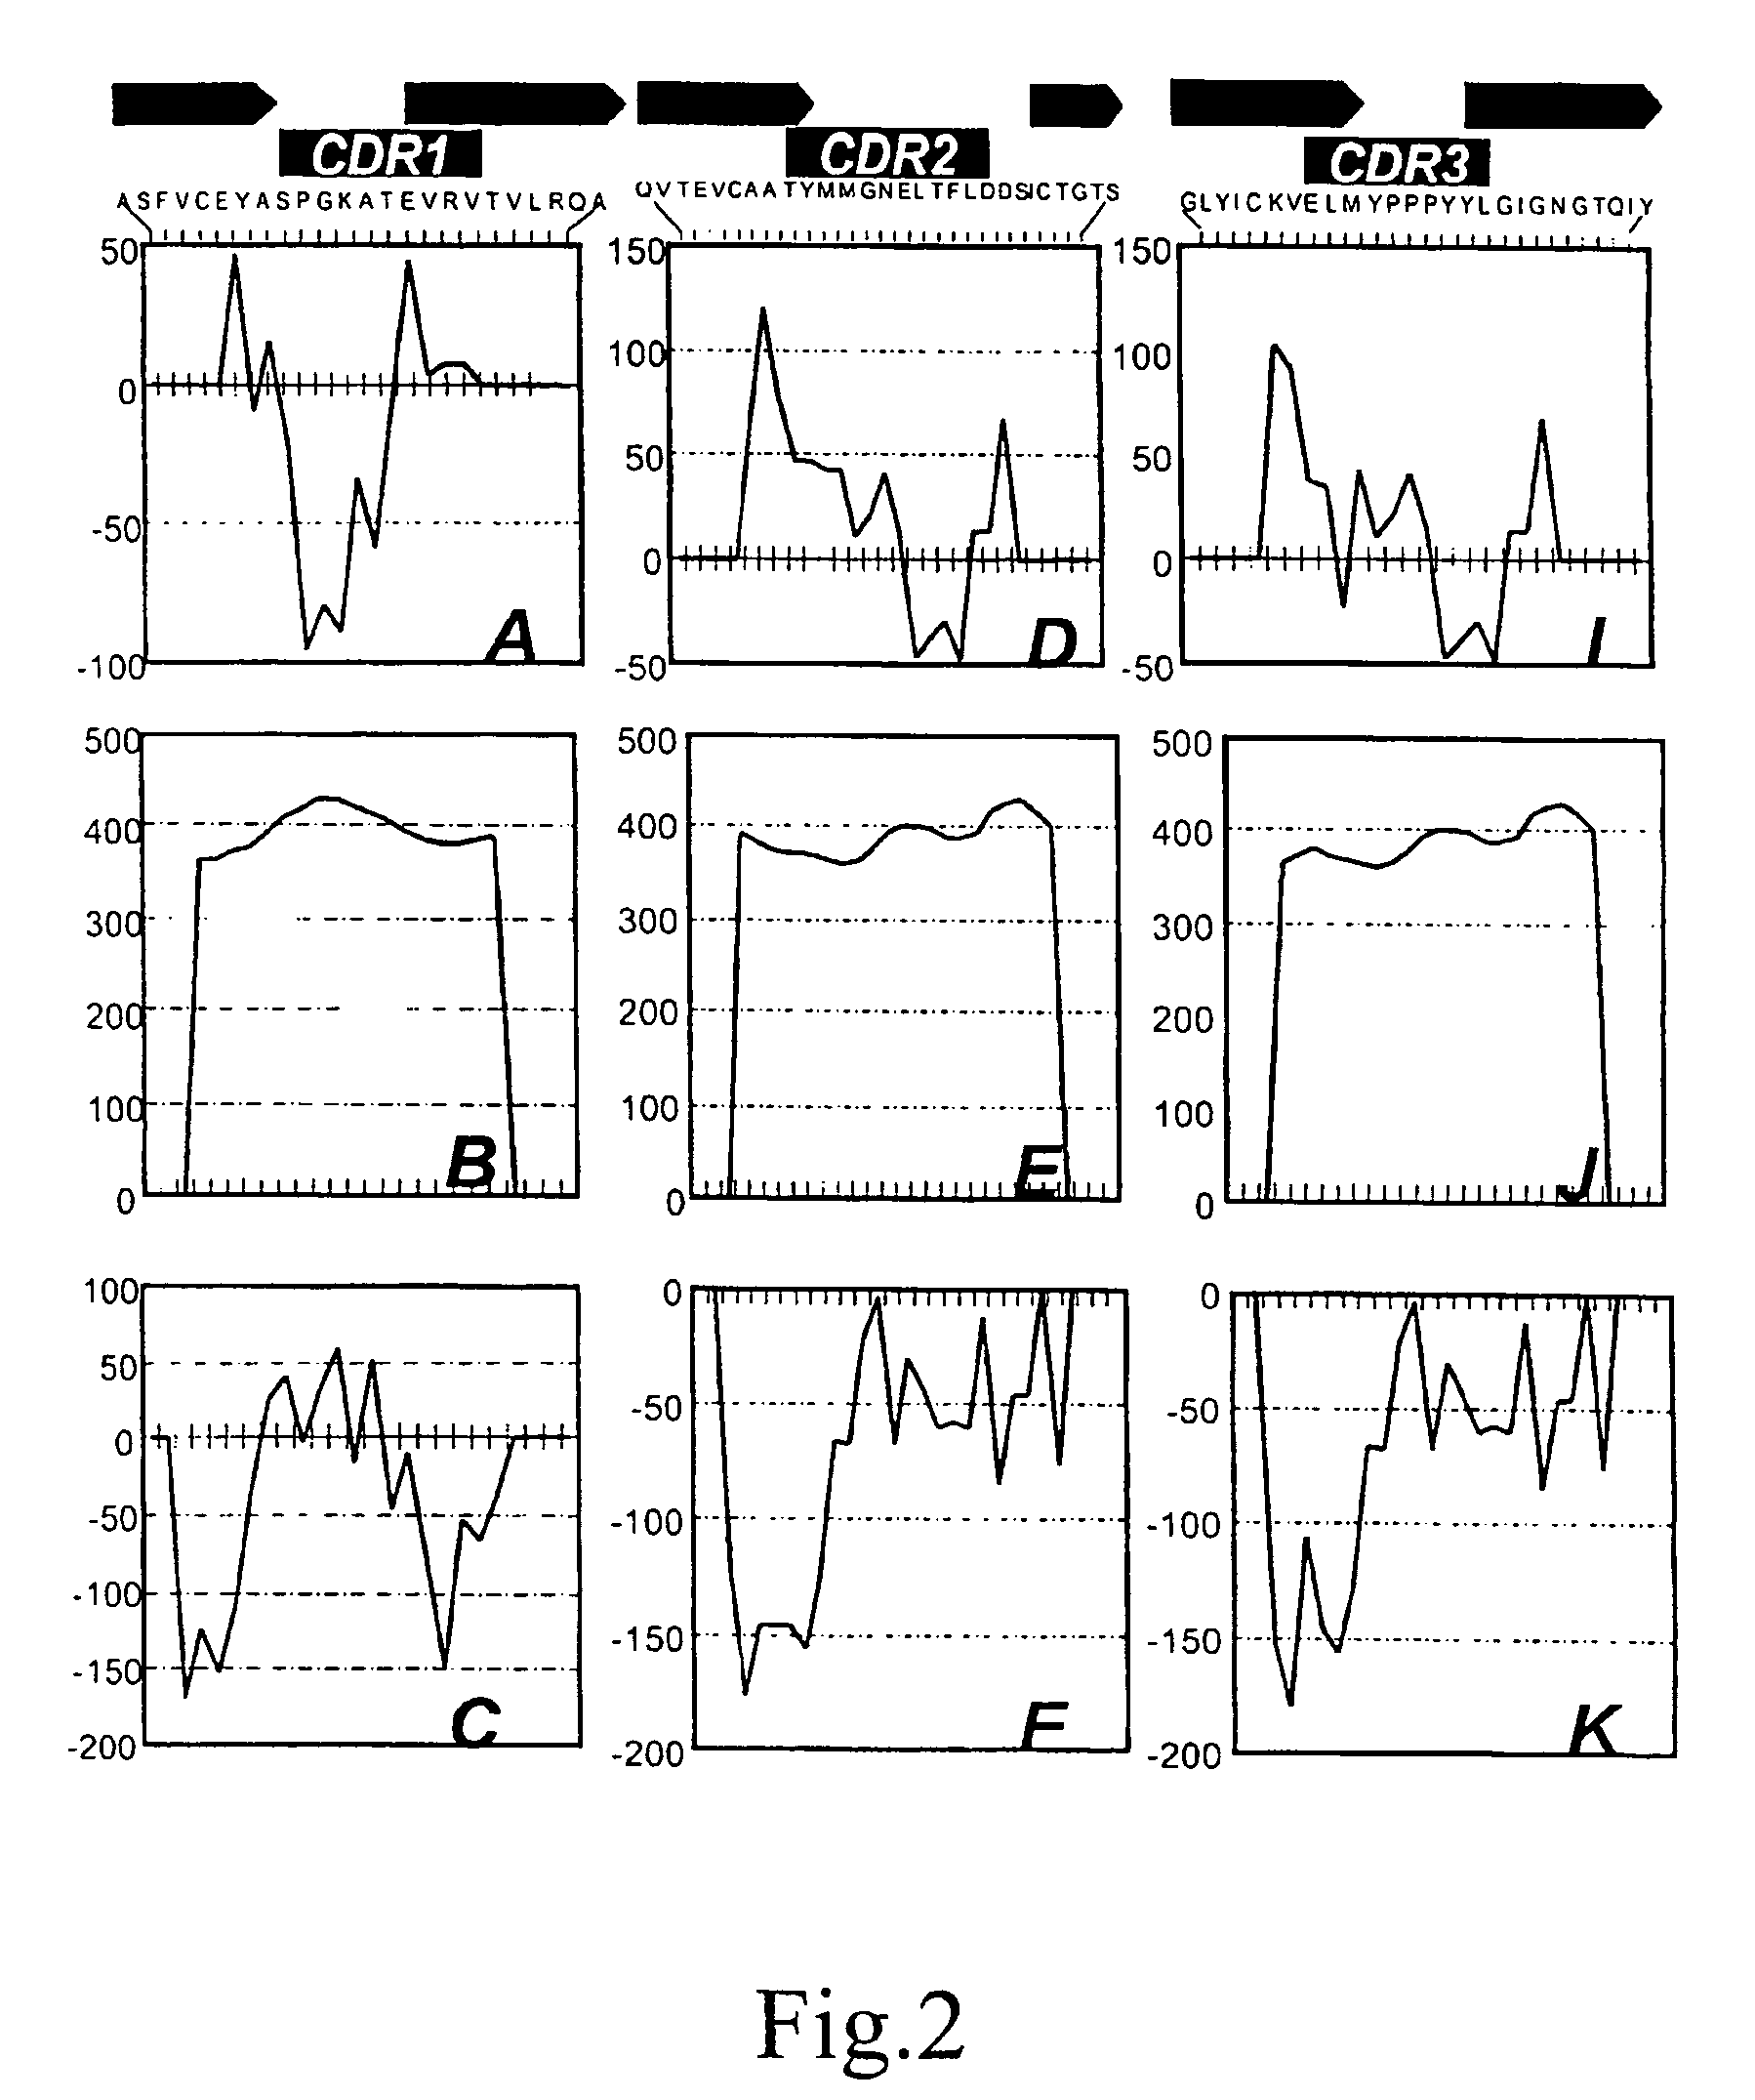 Method for producing human antibodies to human CD152 with properties of agonist, antagonist, or inverse agonist